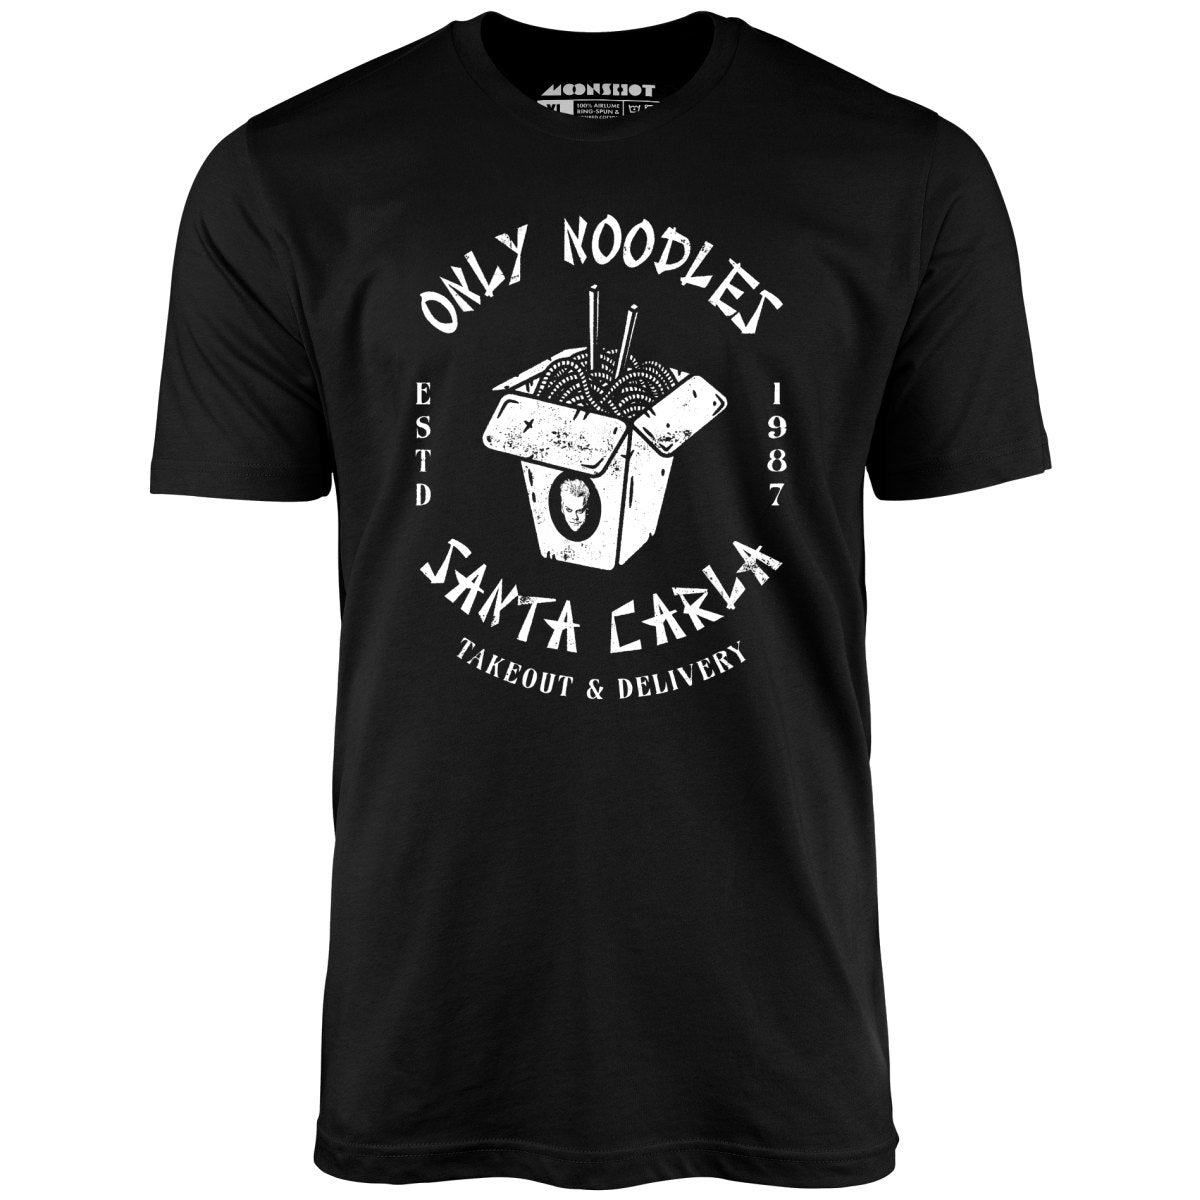 Only Noodles Takeout & Delivery - Santa Carla - Unisex T-Shirt